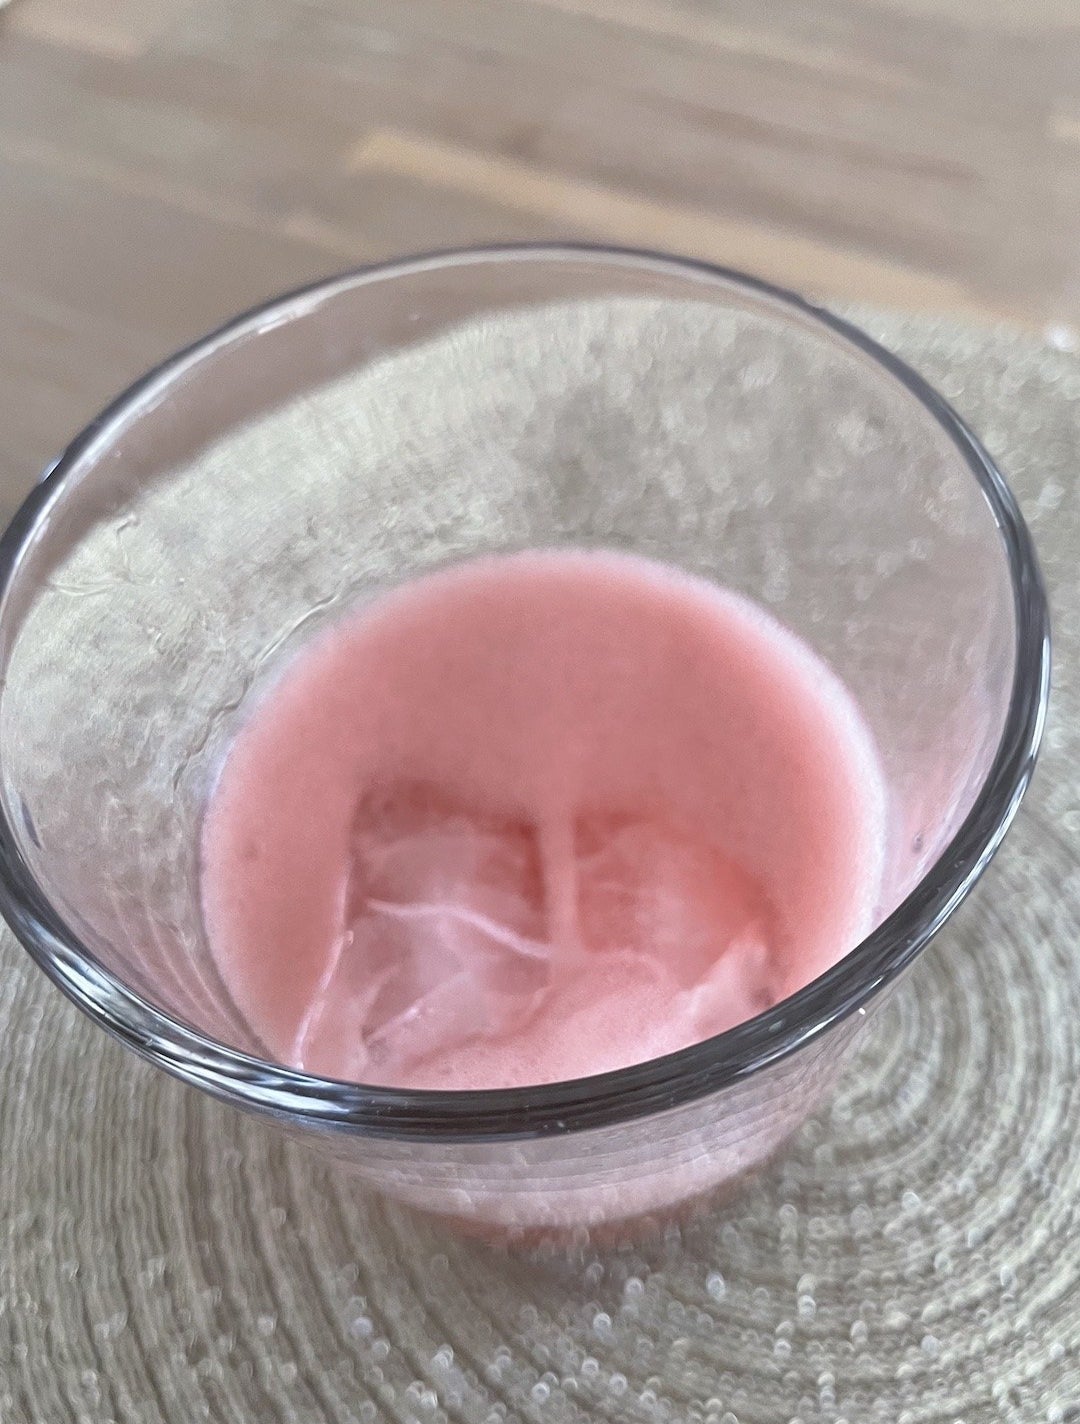 A top-down view of the liquid in the glass, showing a layer of pink fizz